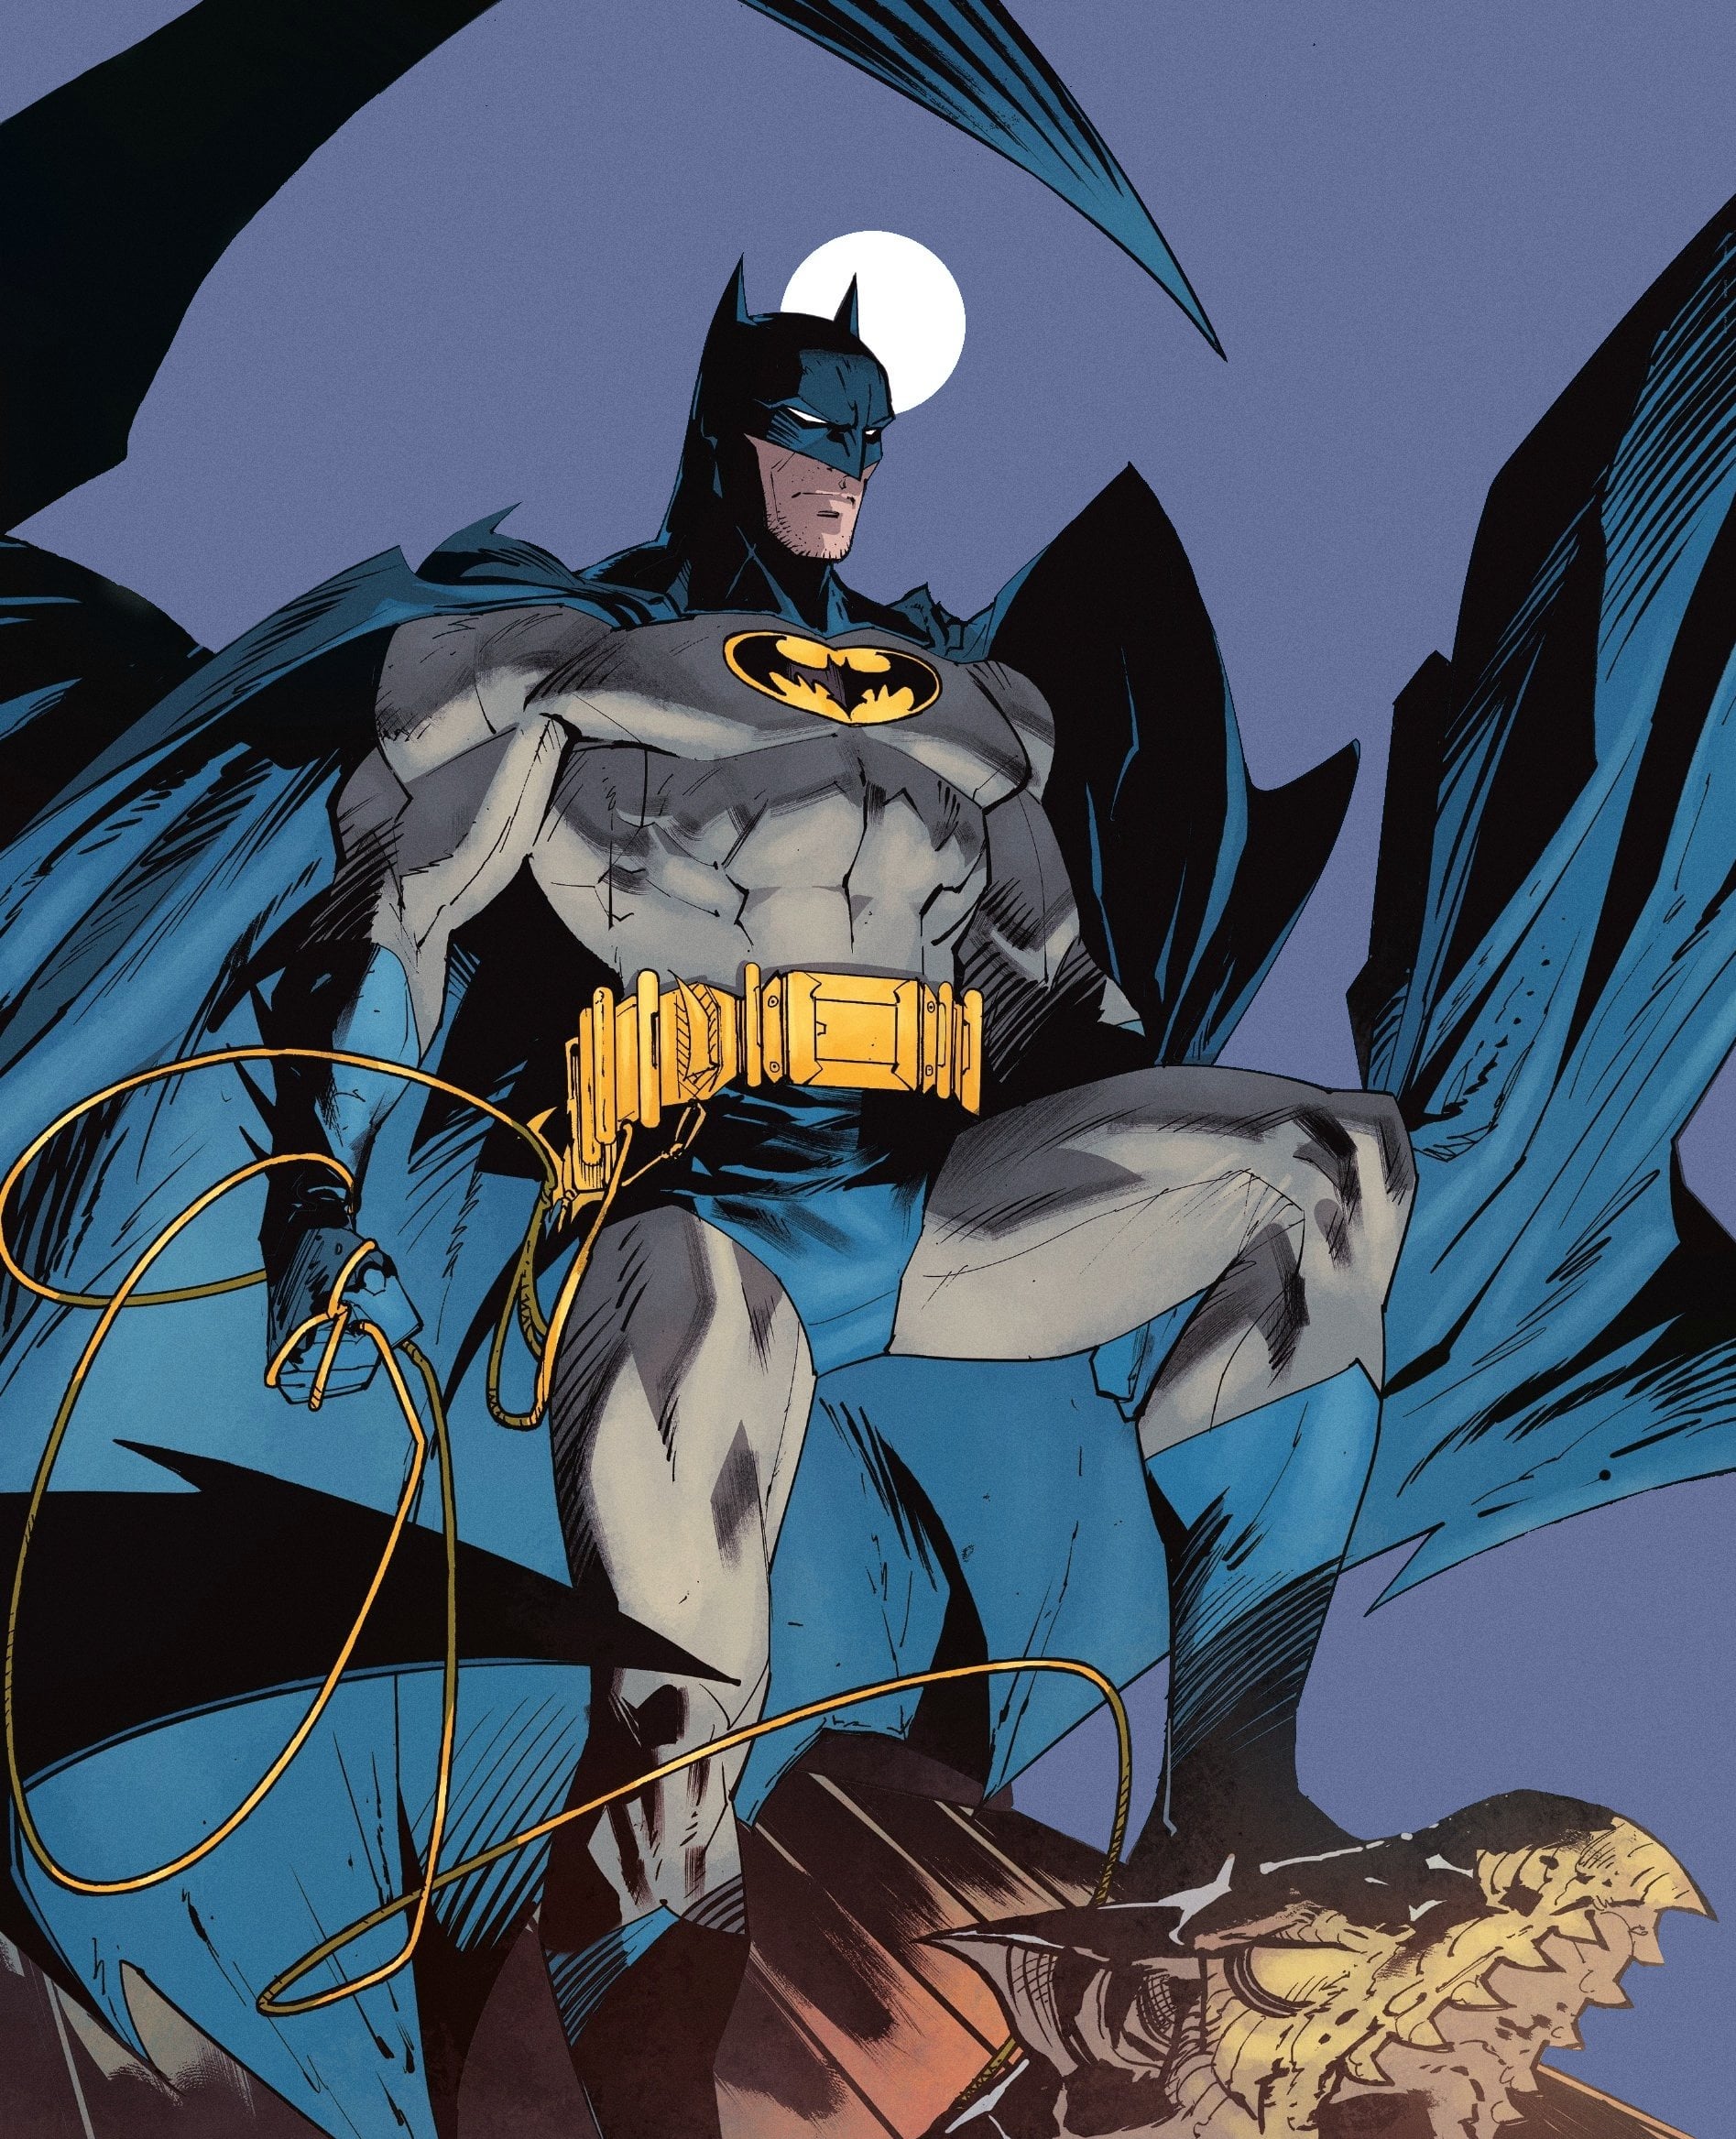 how-would-you-feel-if-the-blue-and-grey-was-the-batsuit-of-v0-elg48jrl62ga1.jpg